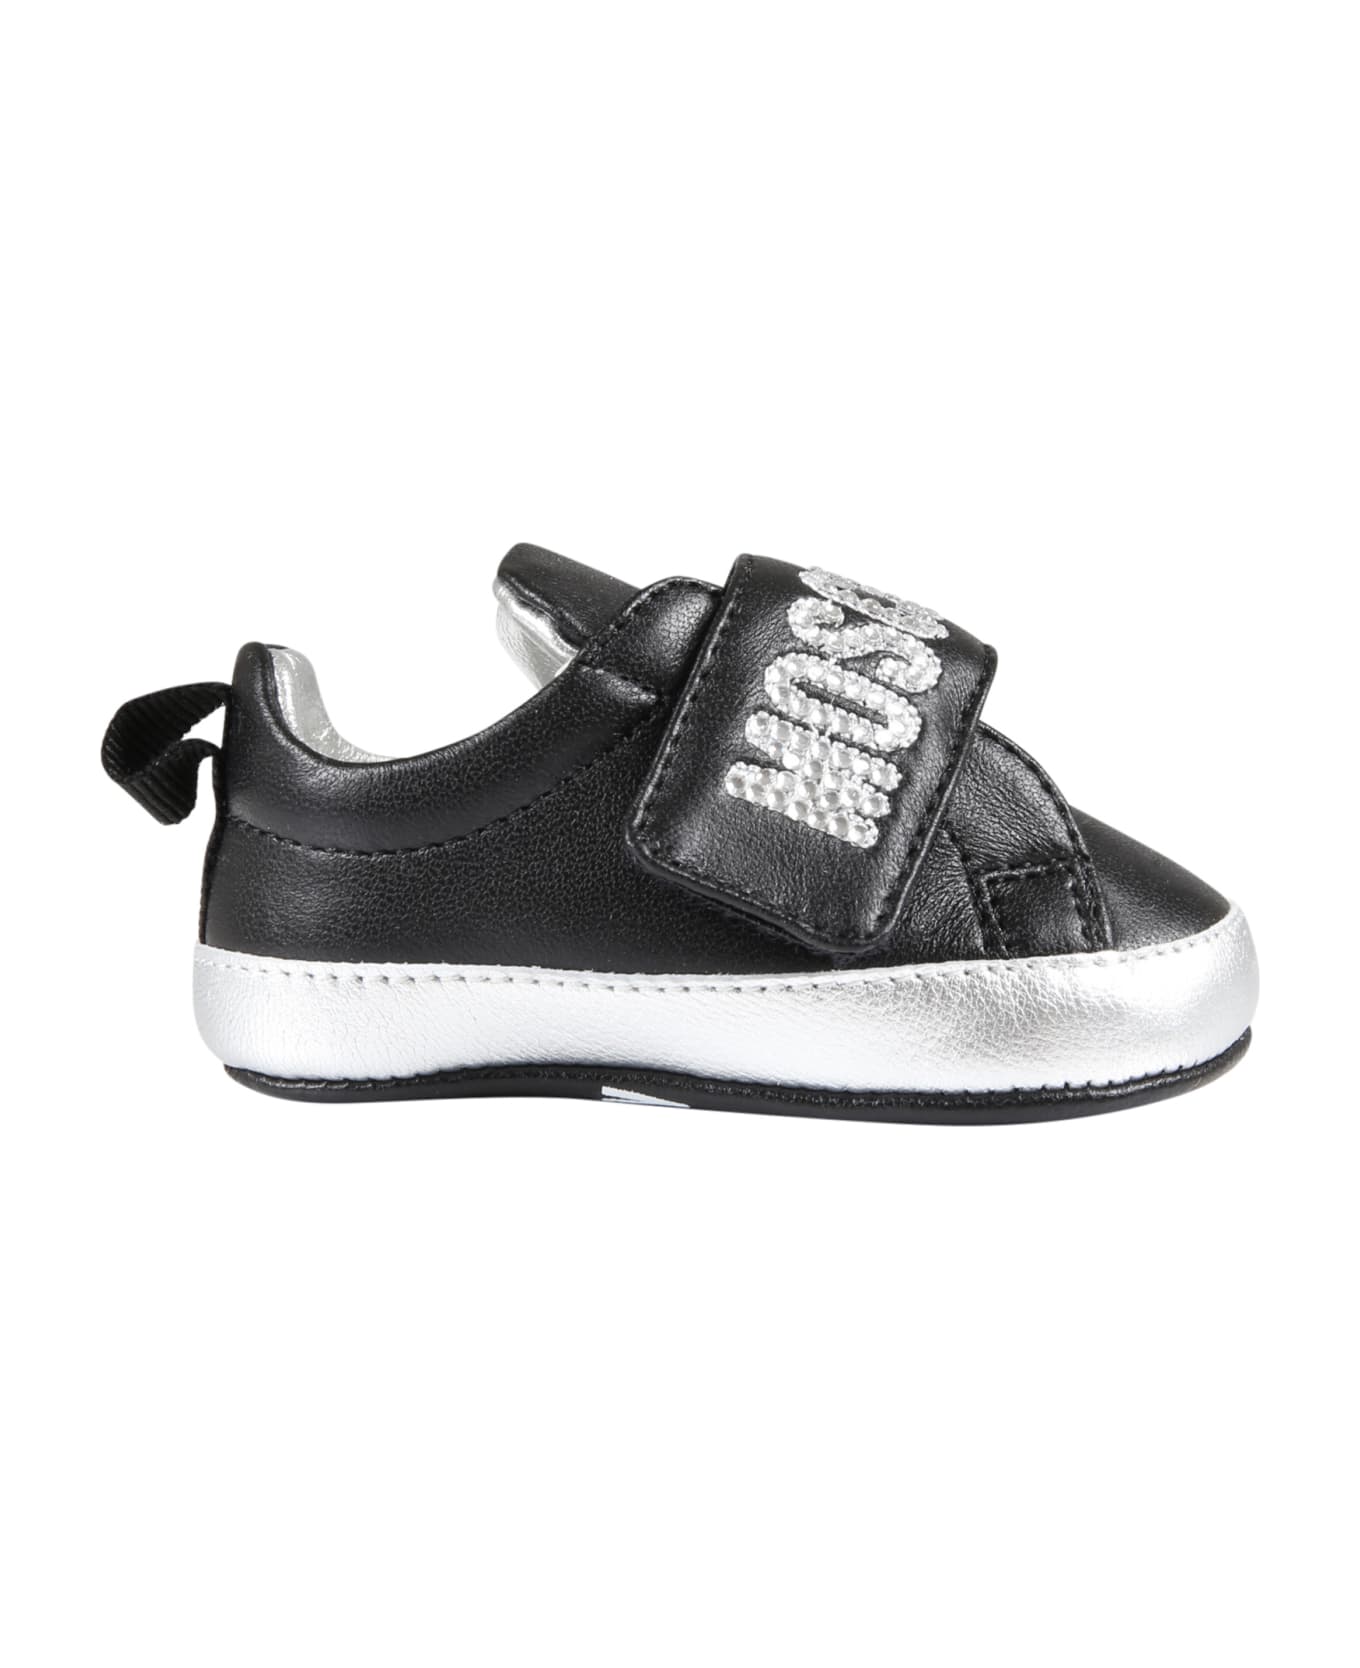 Moschino Black Sneakers For Baby Girl - Black